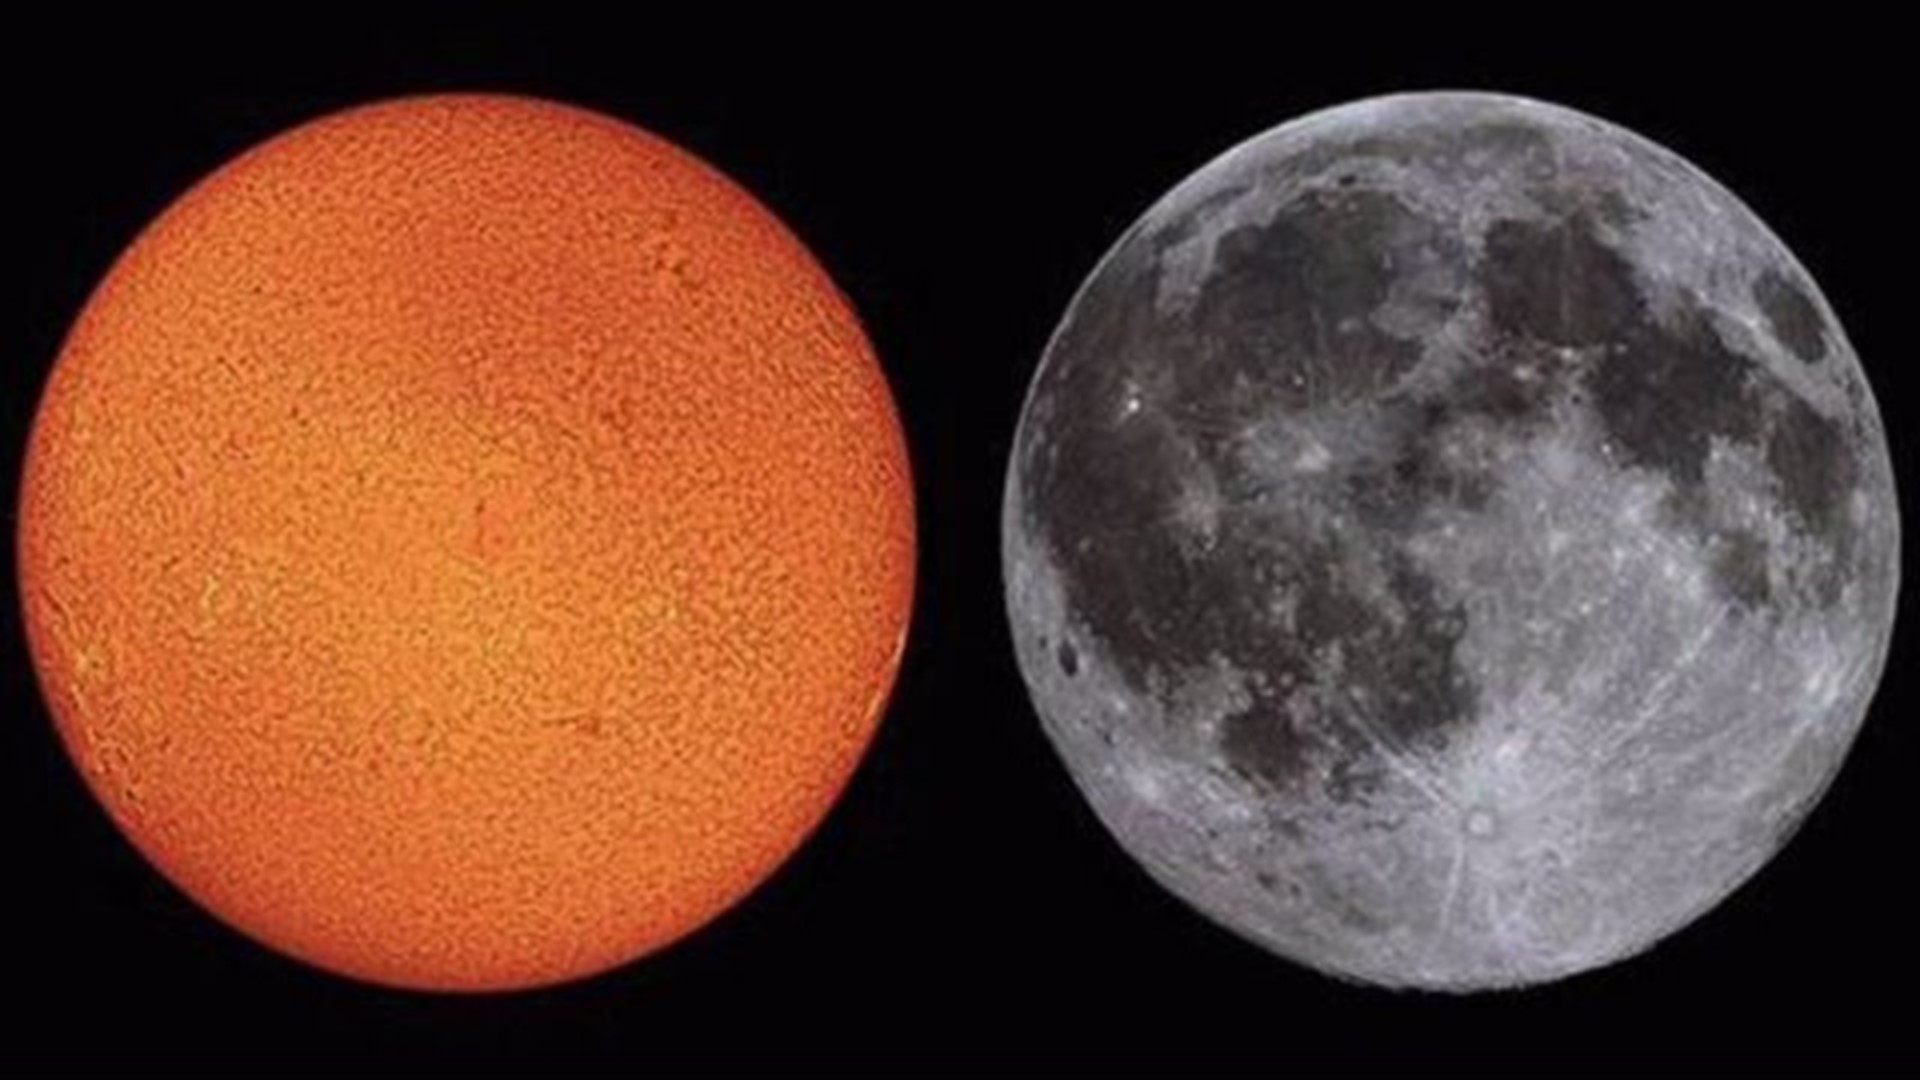 Wham Cam: Sun or Moon Appears Bigger from Earth?